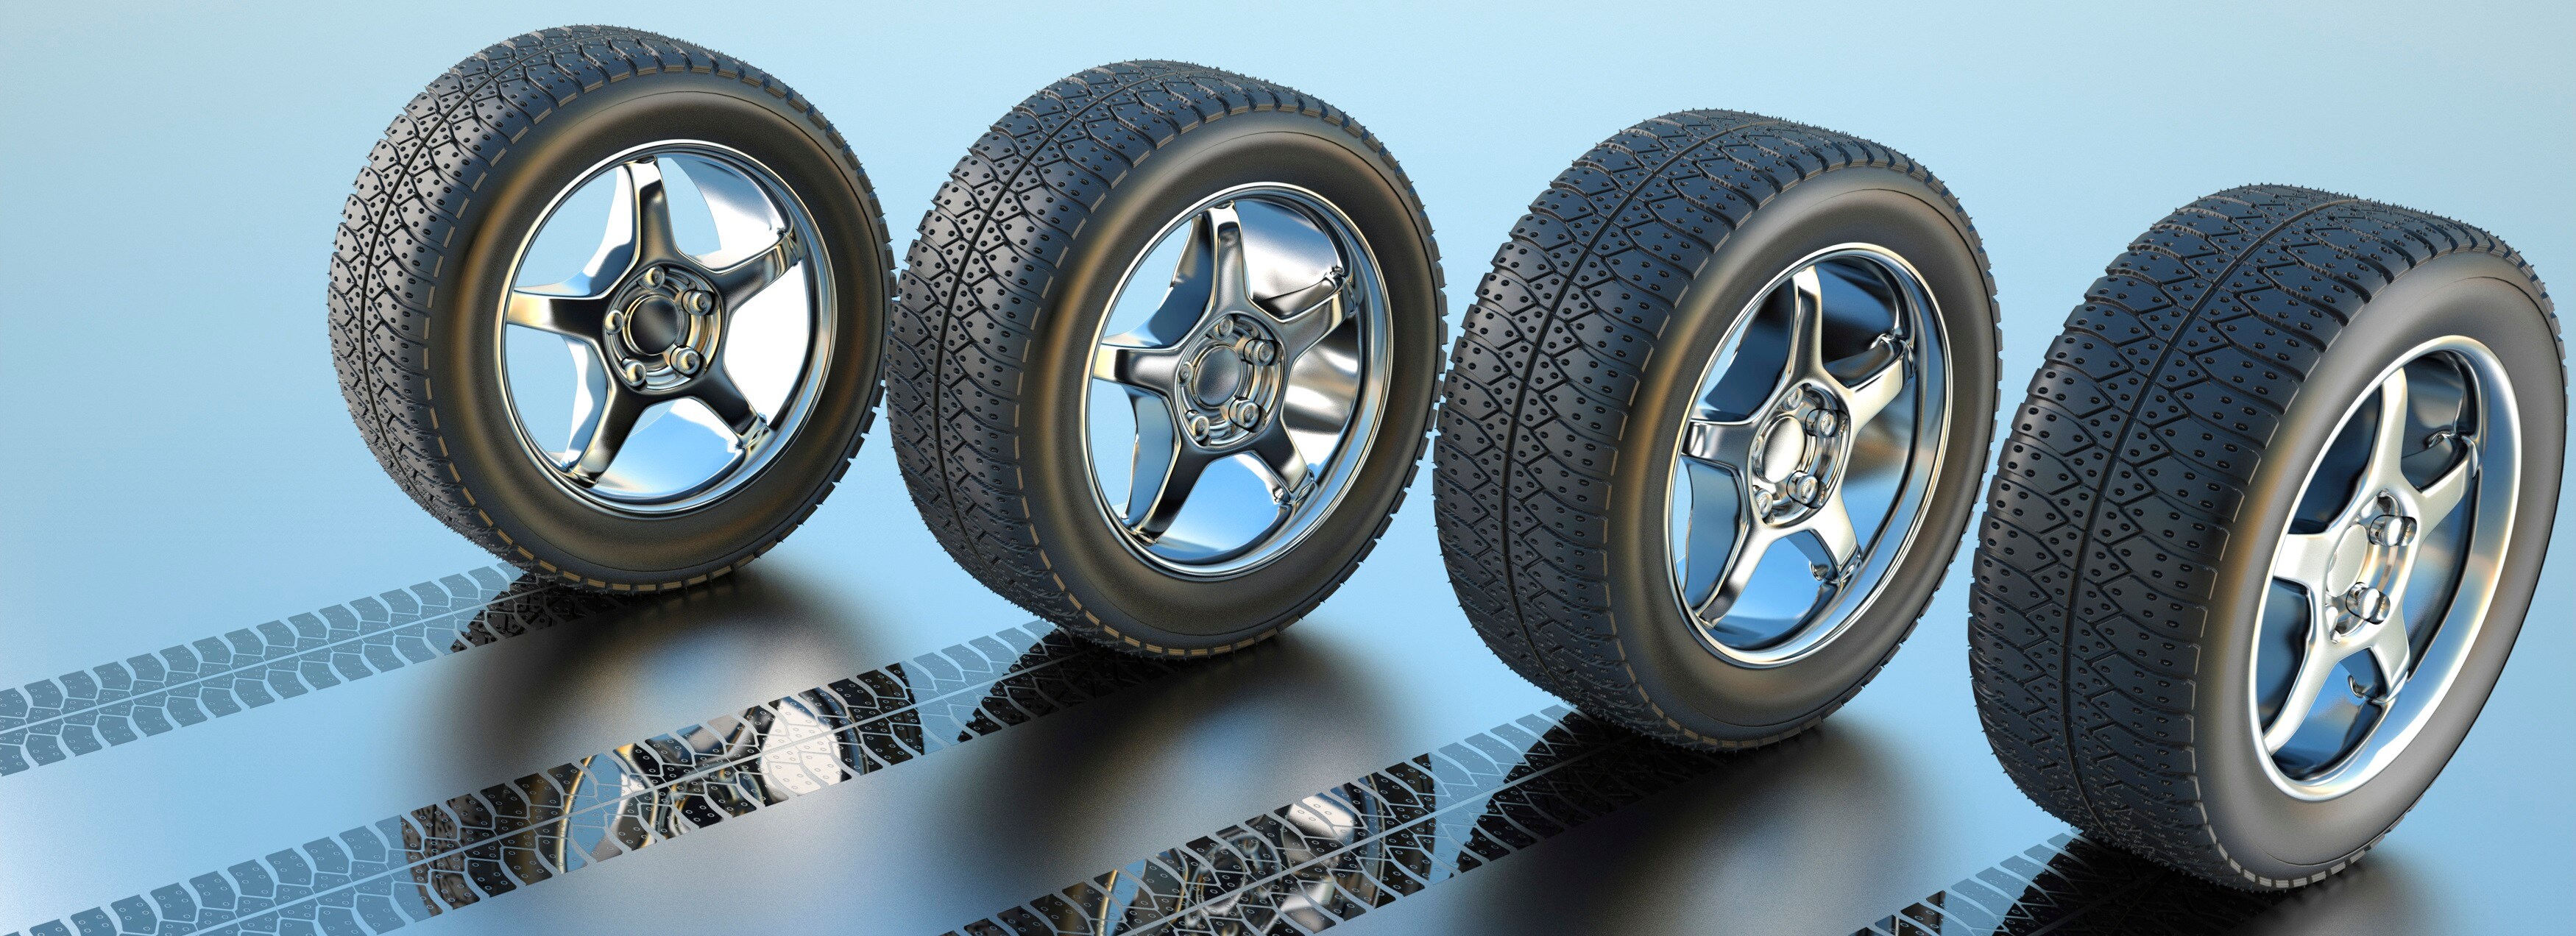 How are tires rotated and balanced